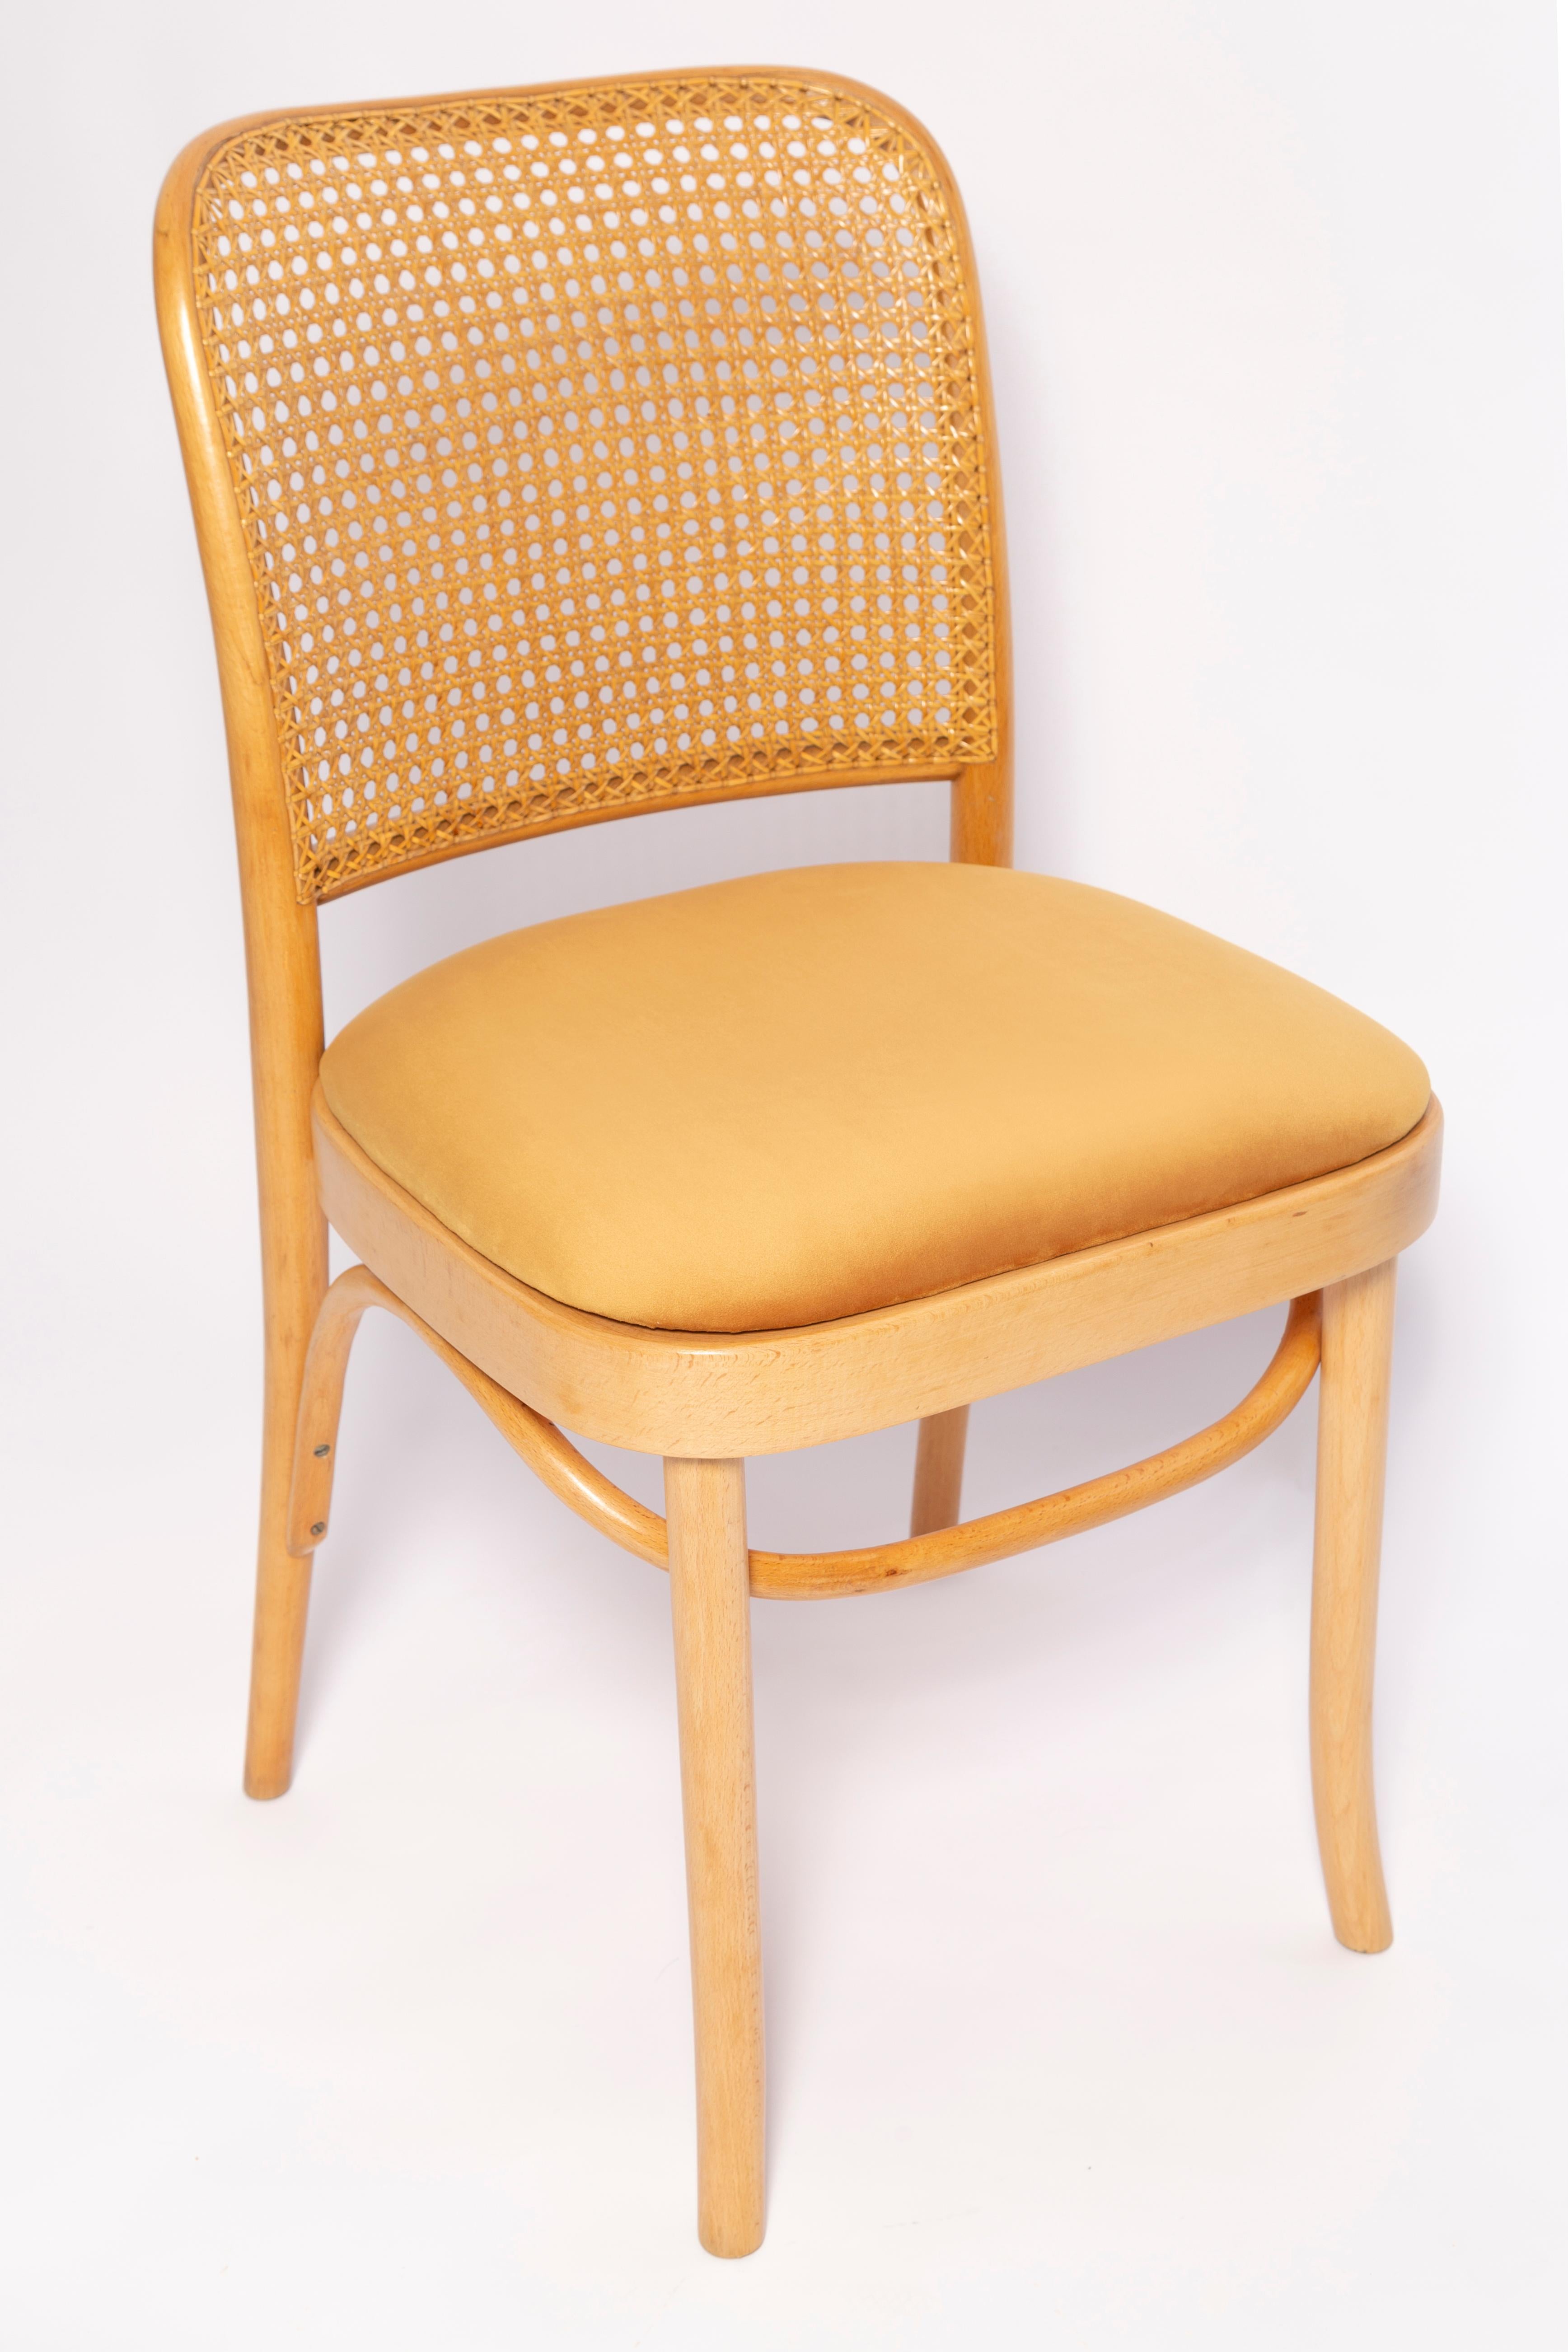 Hand-Crafted Set of Six Mid Century Yellow Velvet Thonet Wood Rattan Chairs, Europe, 1960s For Sale